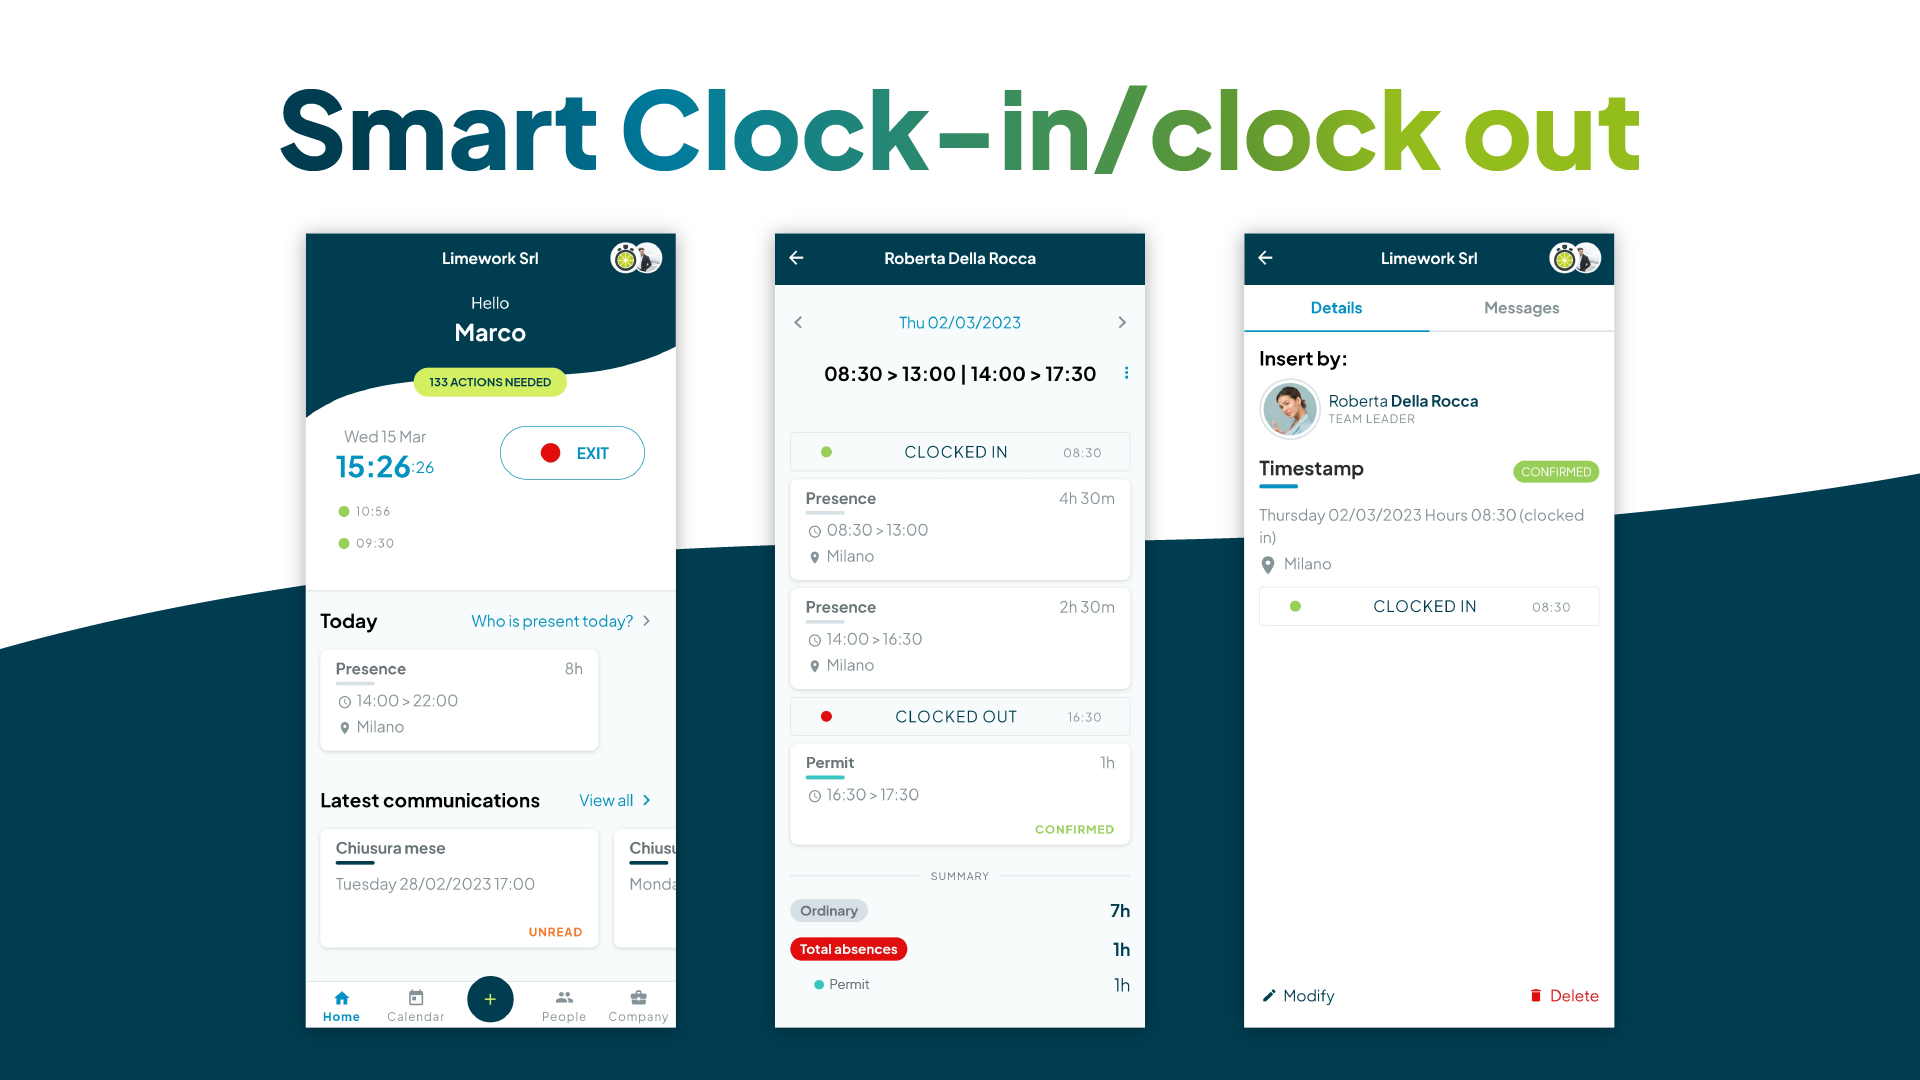 Smart Clock-in/clock out